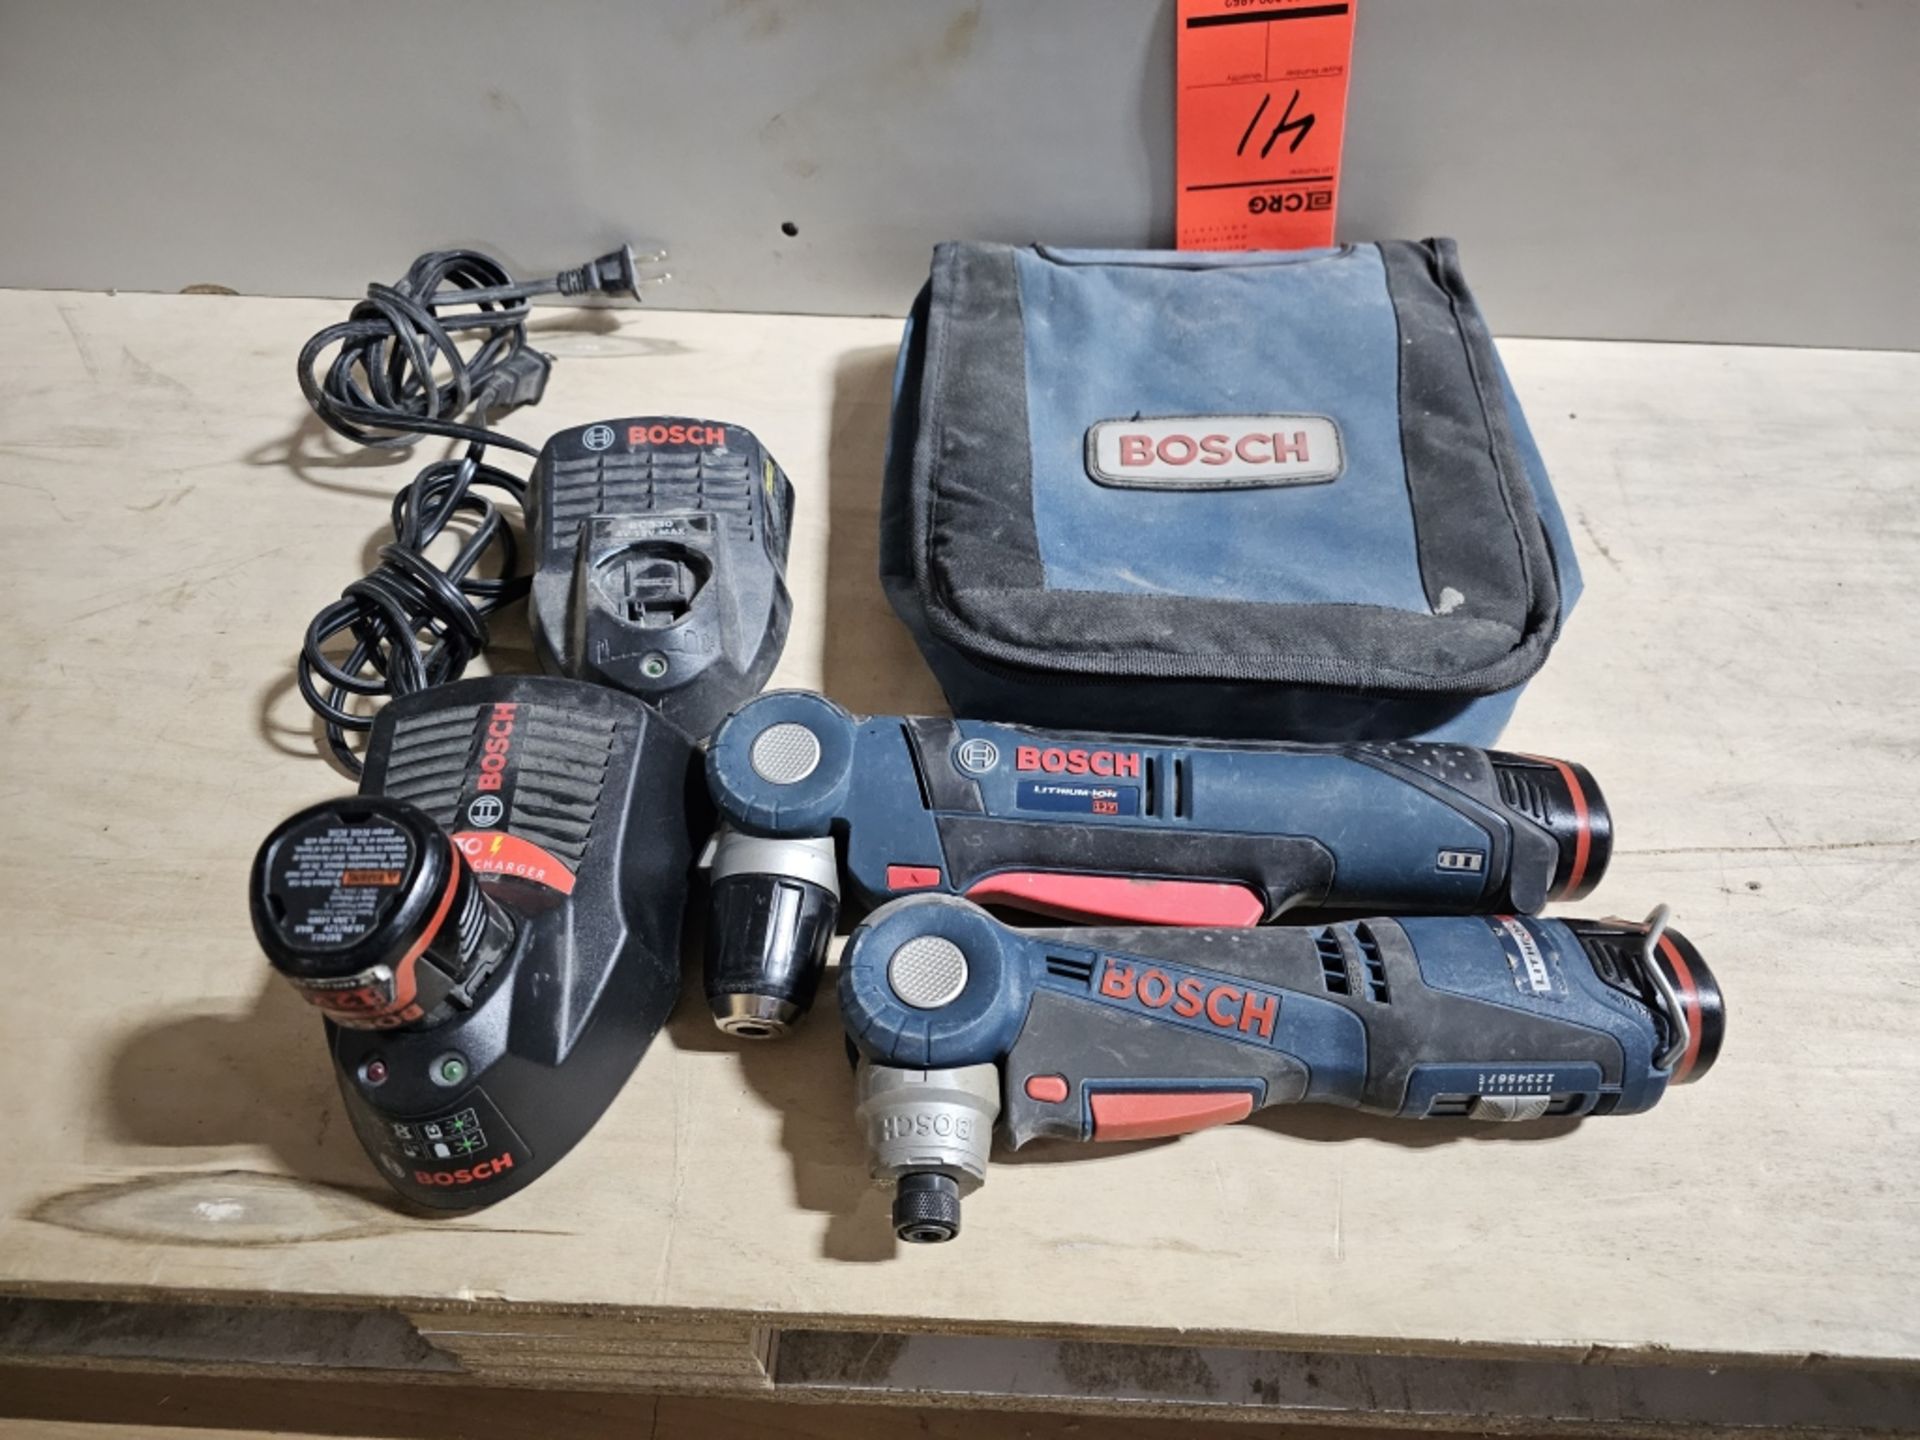 Bosch Drill Driver Lot - Image 2 of 7